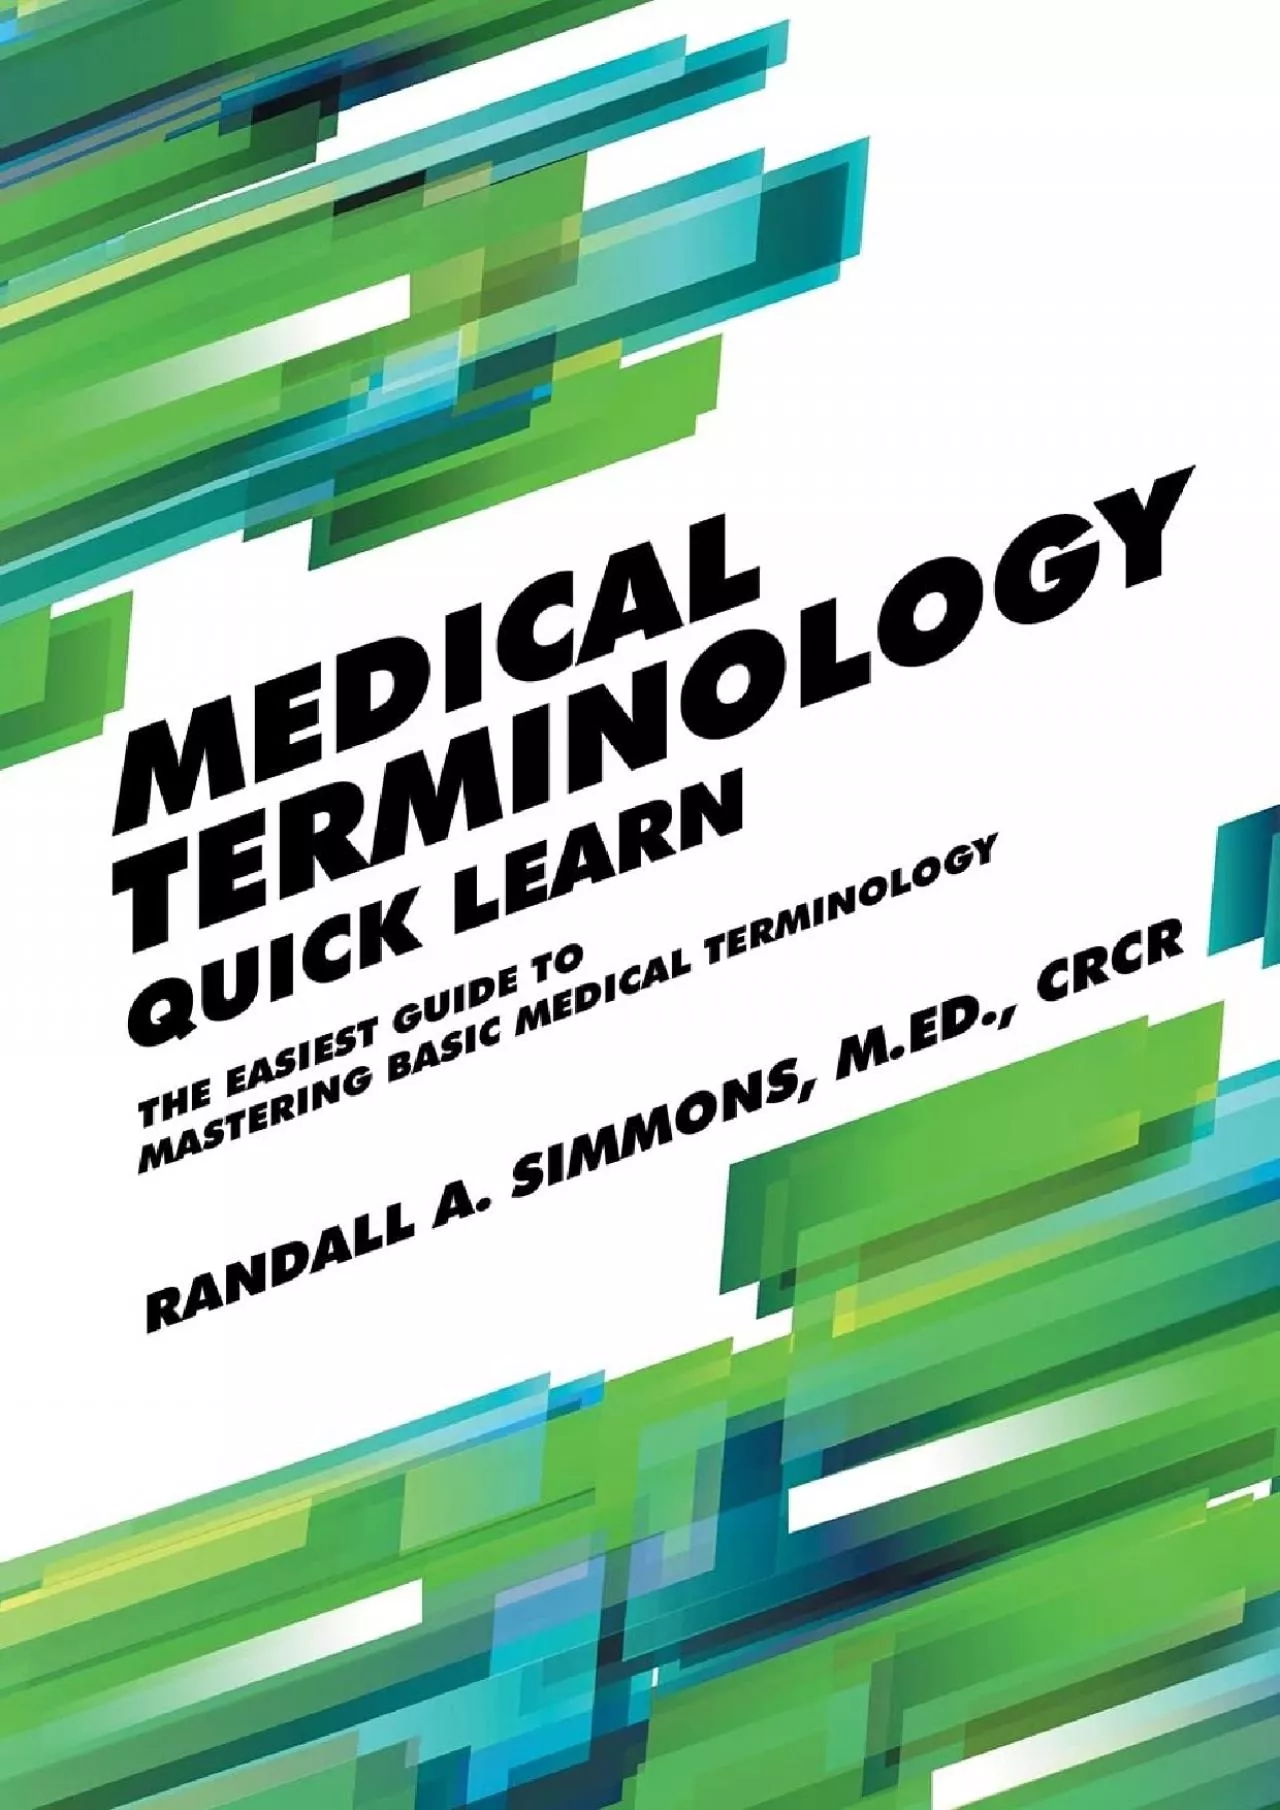 (BOOS)-Medical Terminology Quick Learn: The Easiest Guide to Mastering Basic Medical Terminology